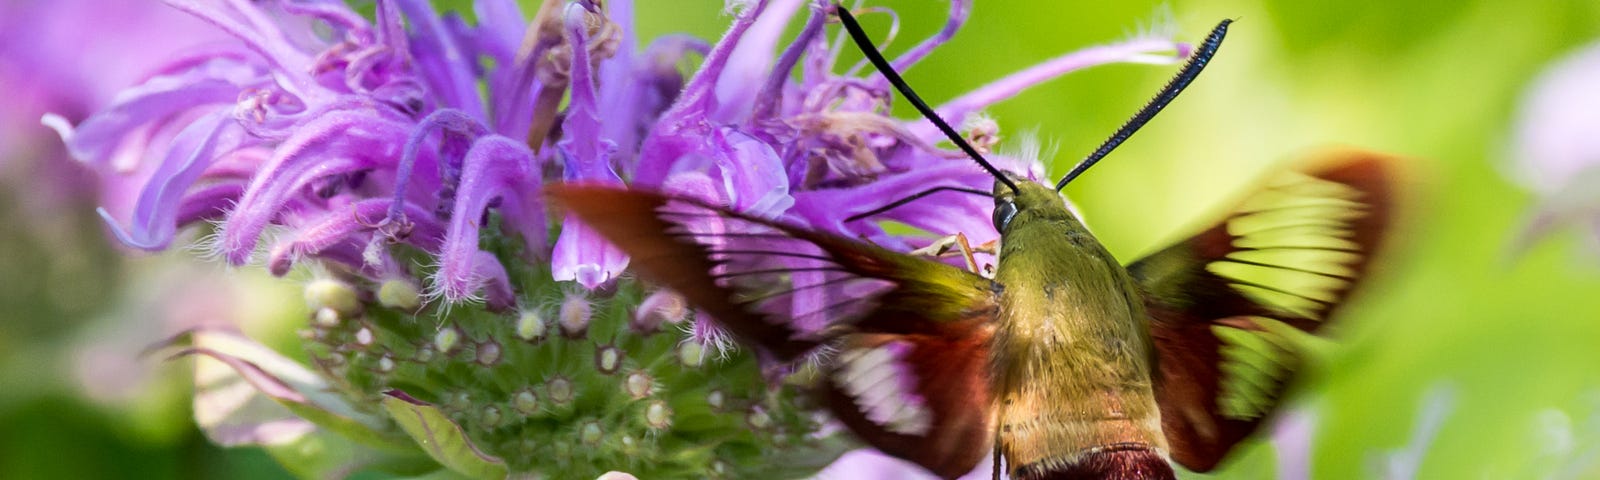 Snowberry clearwing moth drinking nectar from bee balm flowers. © Randy Runtsch.